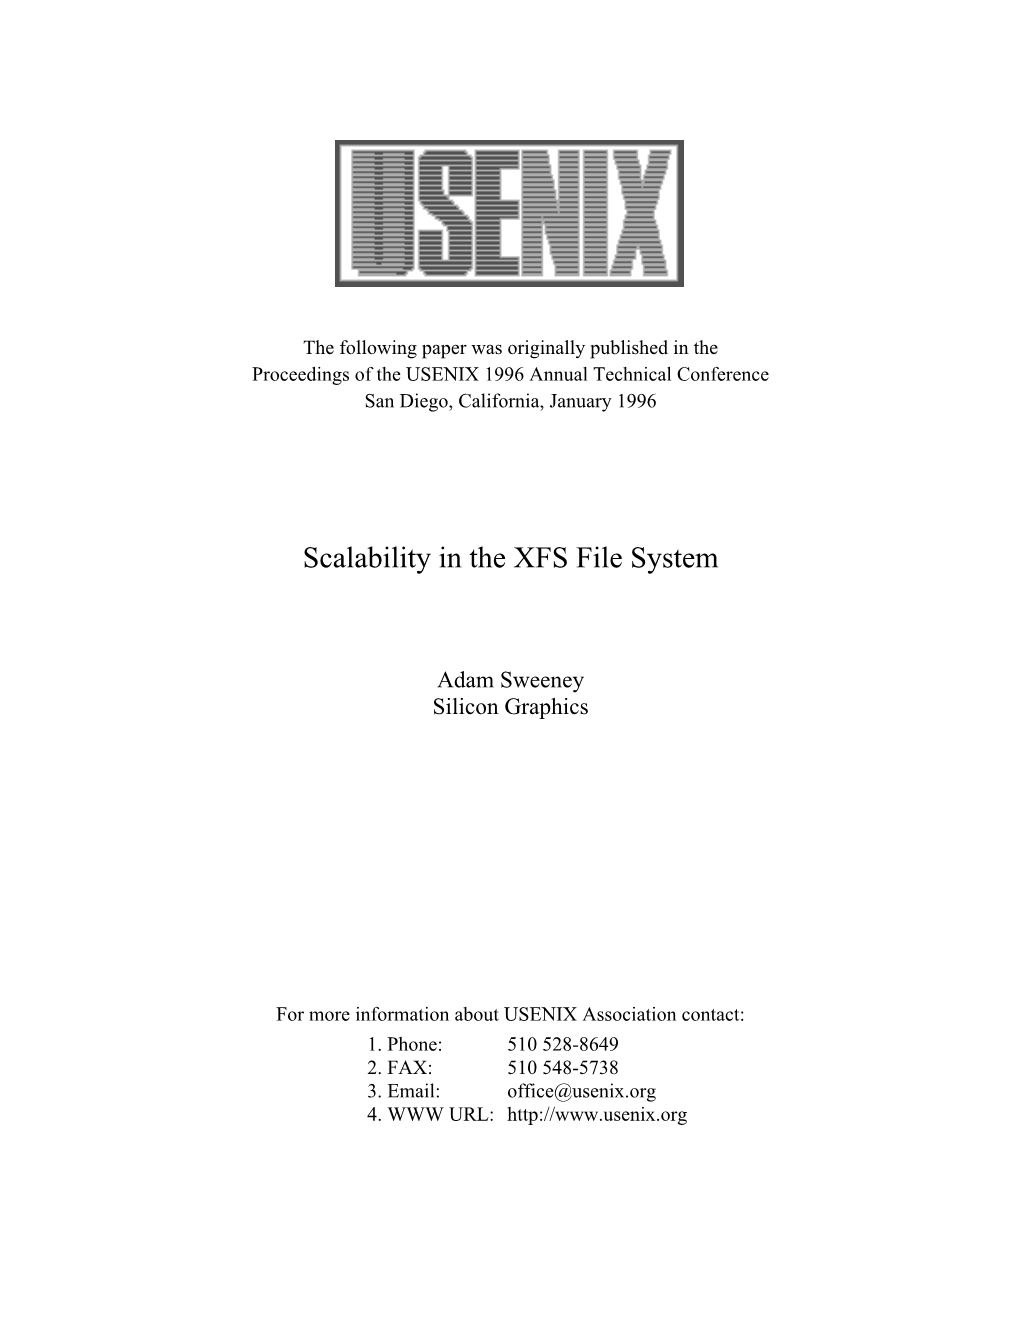 Scalability in the XFS File System